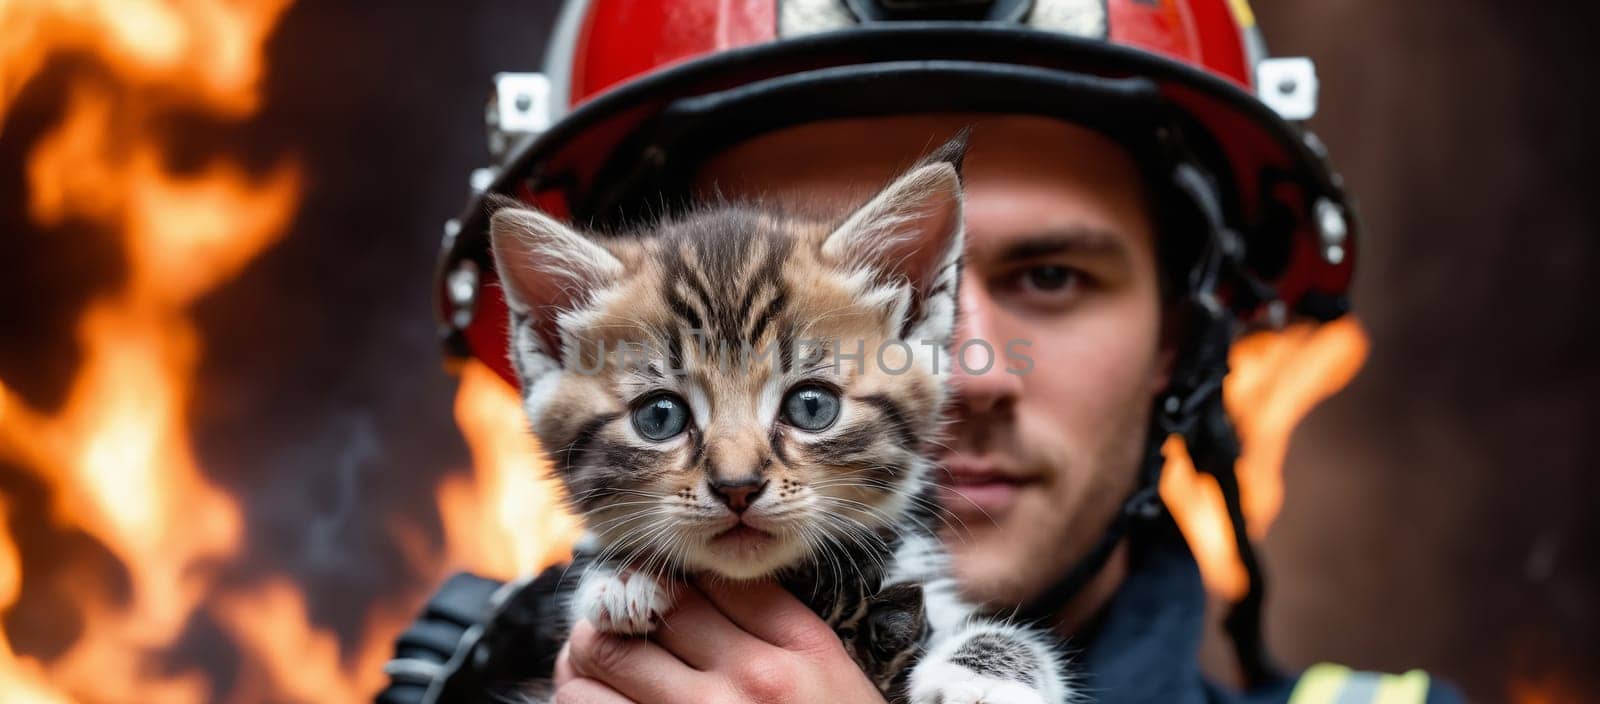 firefighter with a kitten in his arms on the background of fire.